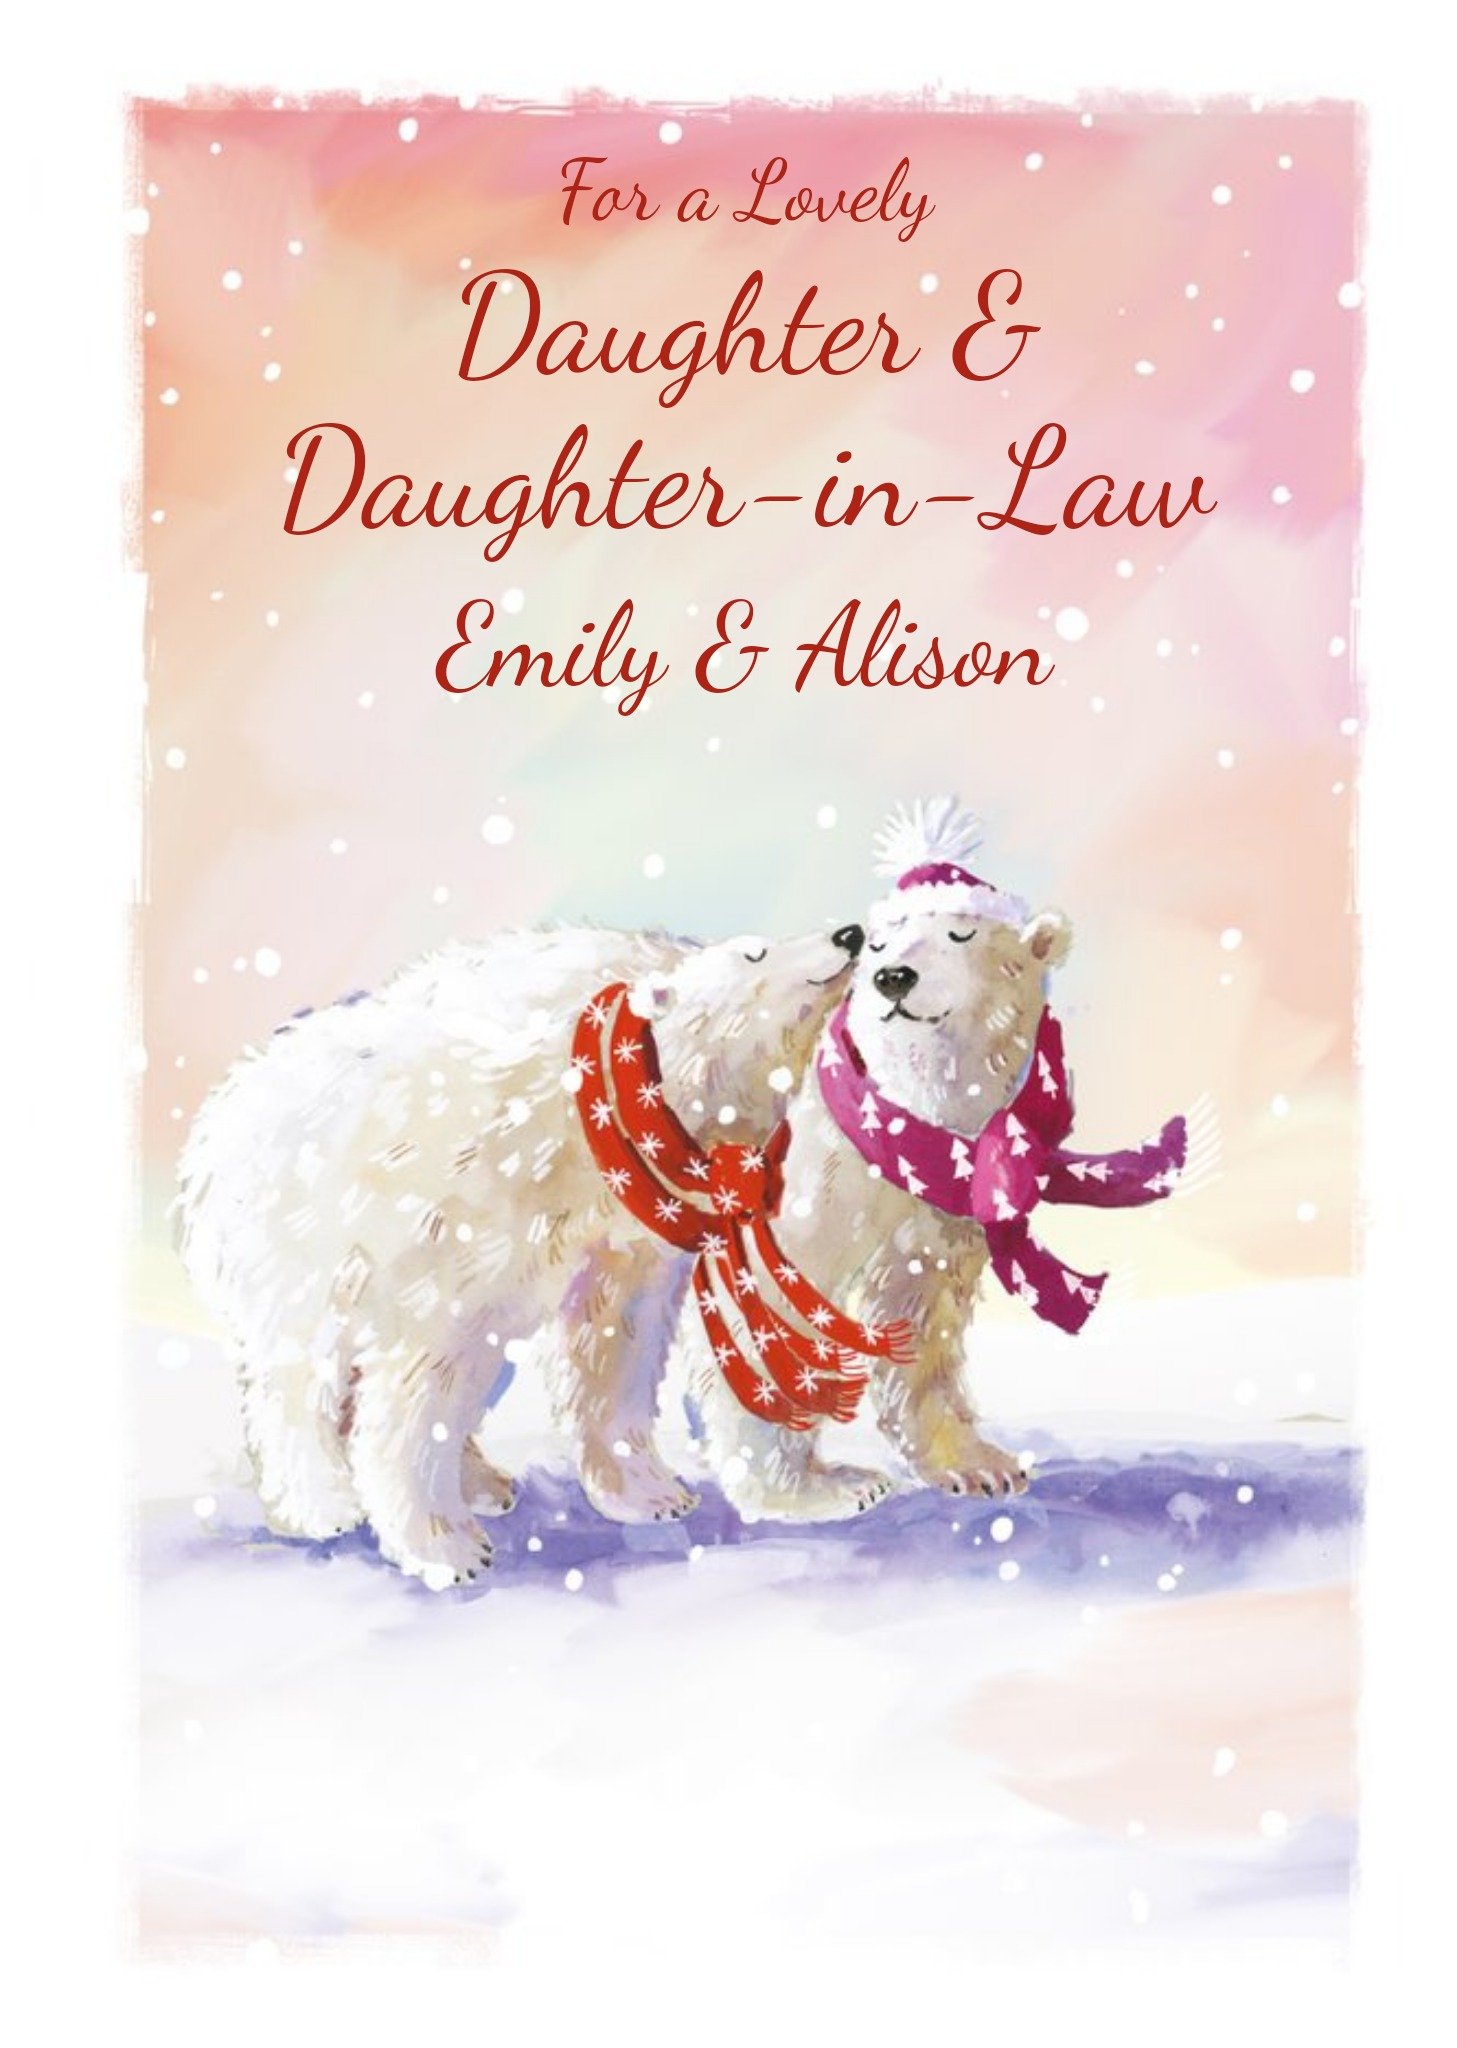 Ling Design Traditional Daughter And Daughter-In-Law Polar Bear Christmas Card Ecard